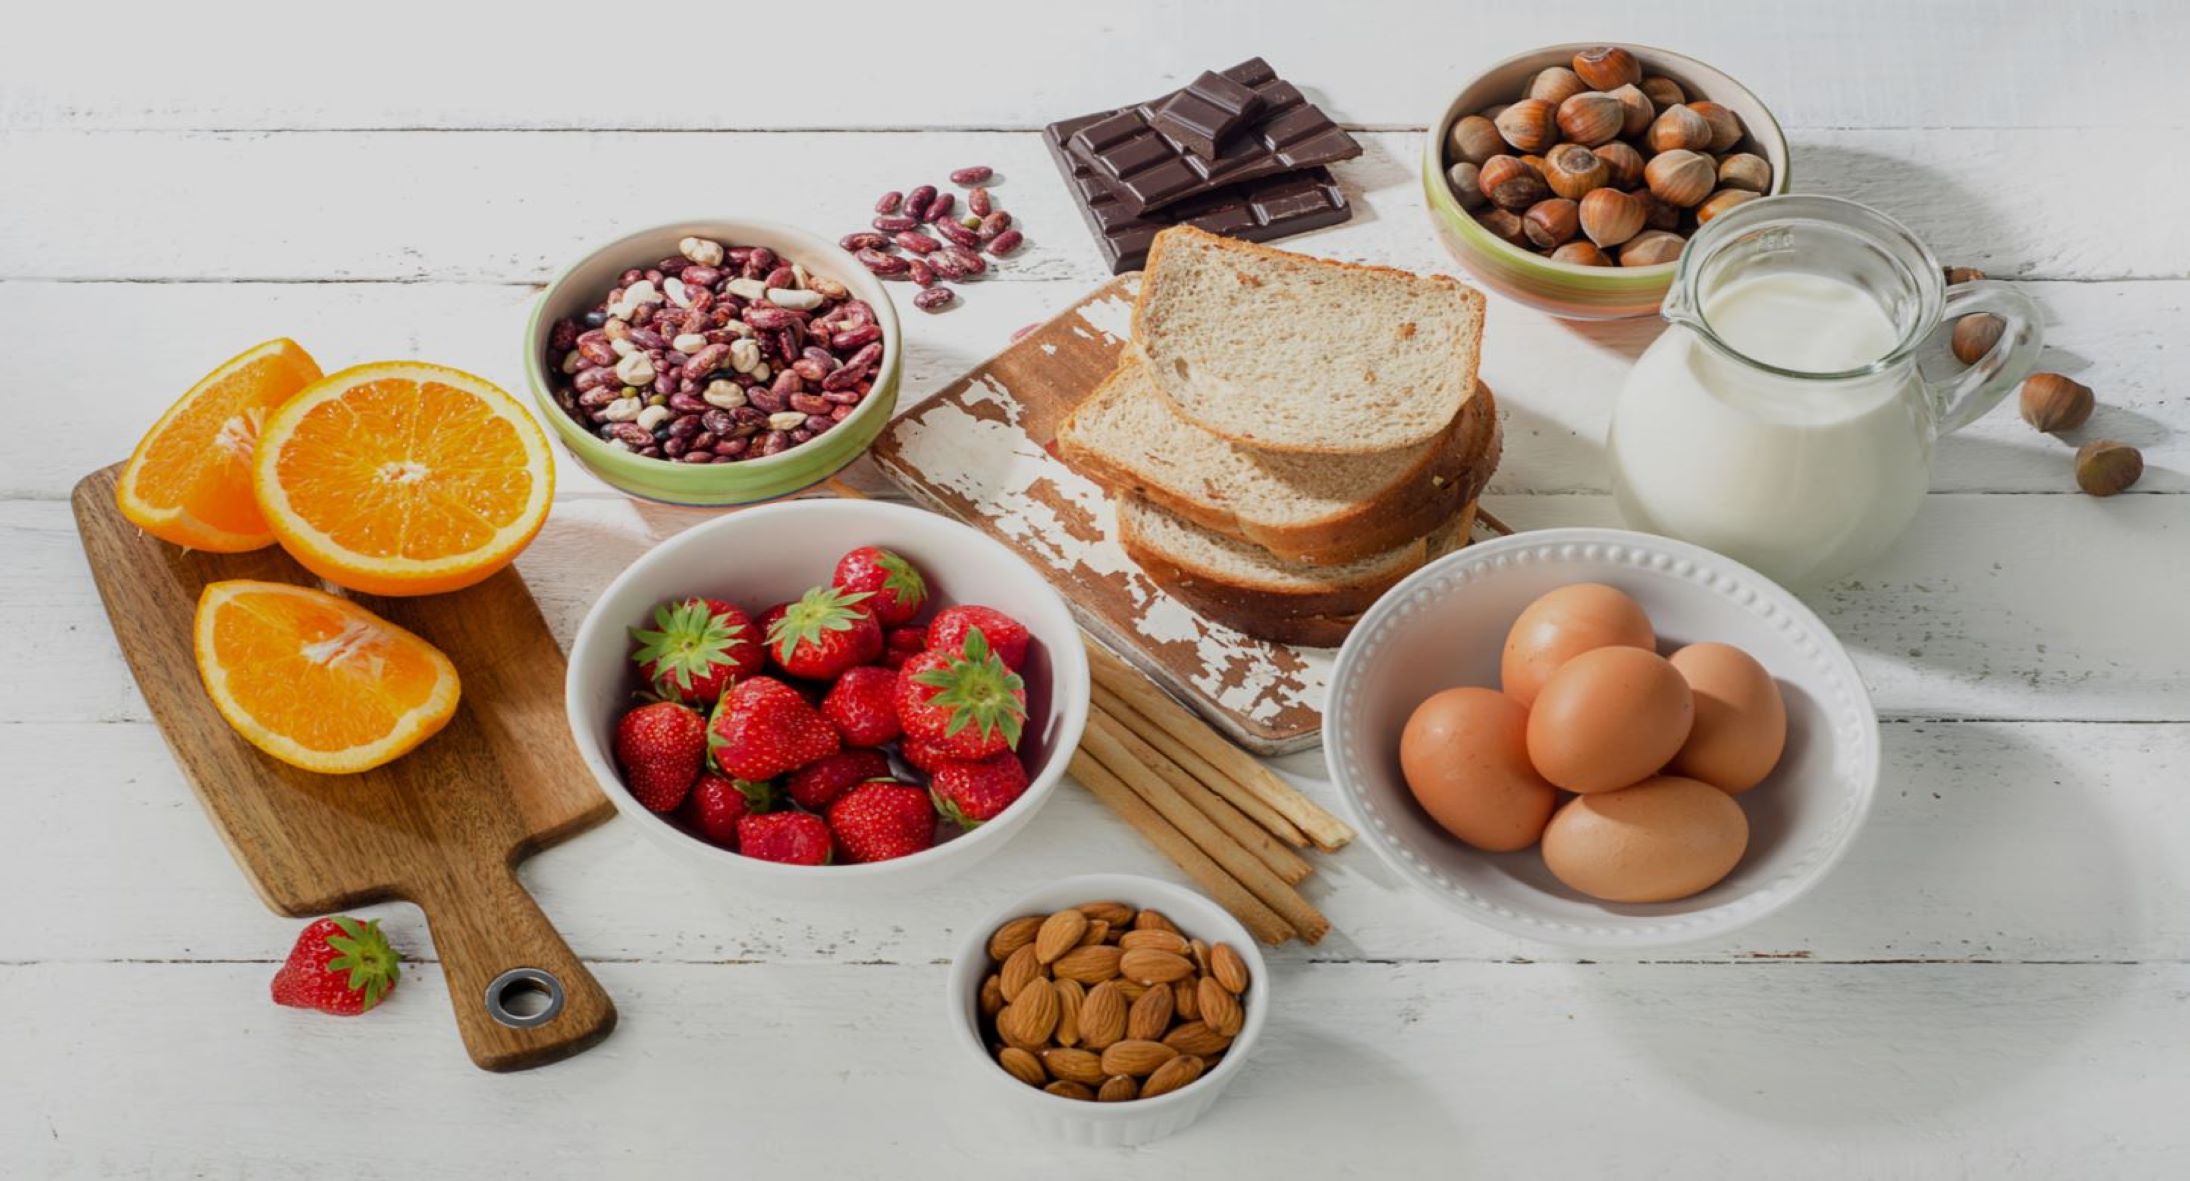 A spread of fruit, nuts, breads, eggs, milk and chocolate